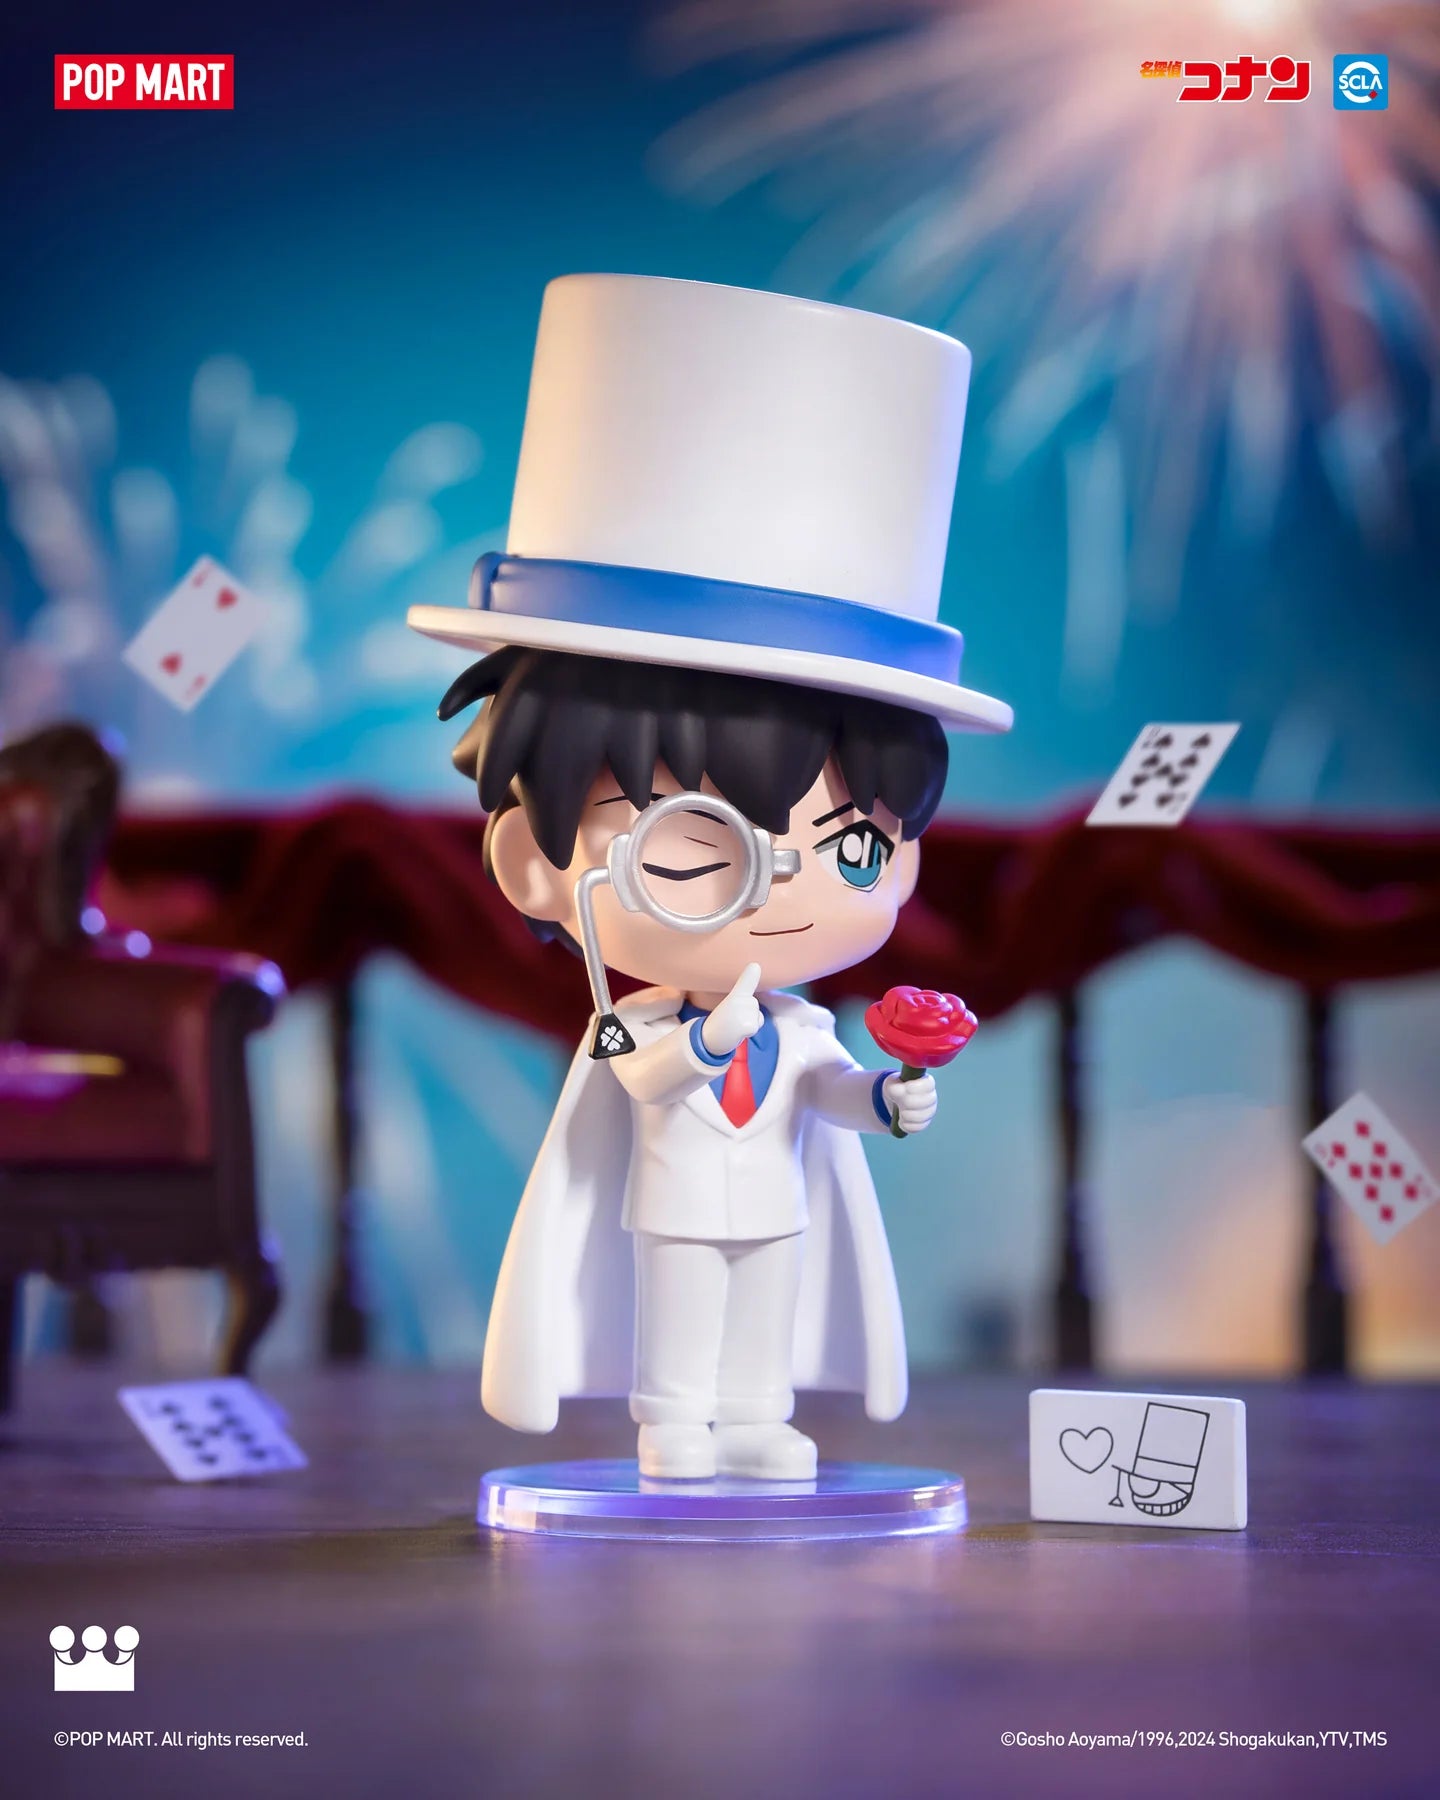 Toy figurine of a man in a white suit with a flower and magnifying glass, part of Detective Conan Carnival Blind Box Series.